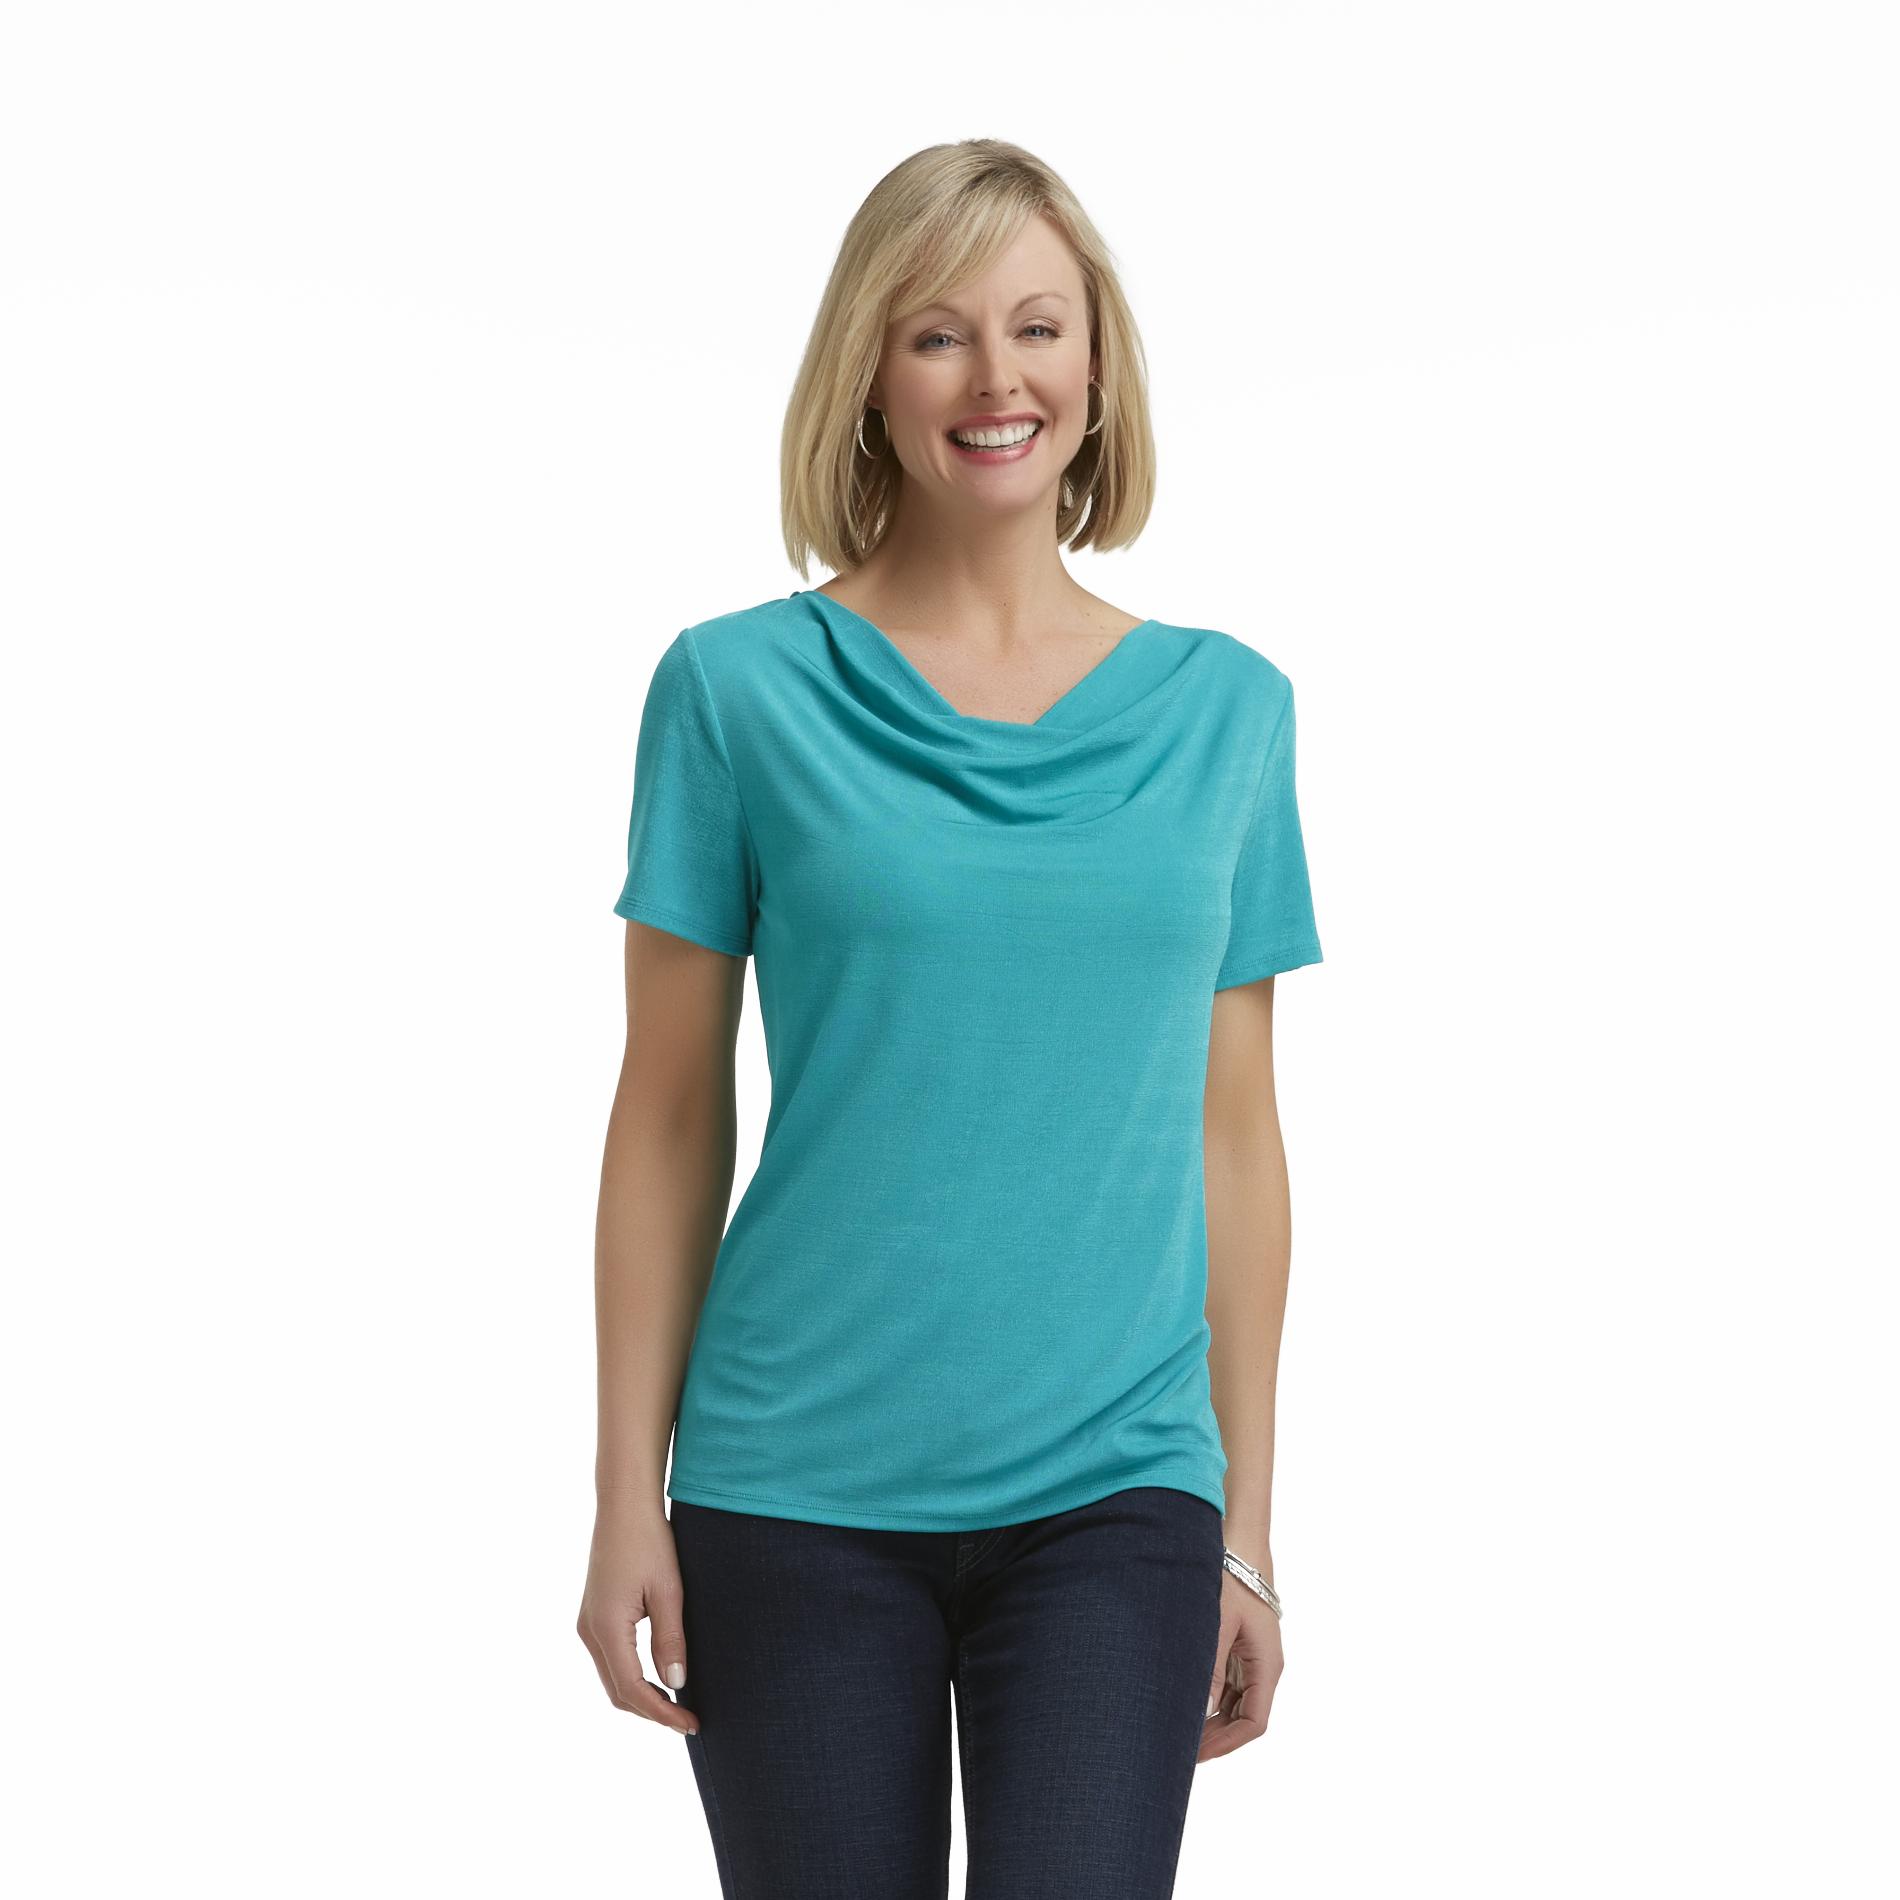 Jaclyn Smith Women's Cowl Neck Stretch Top